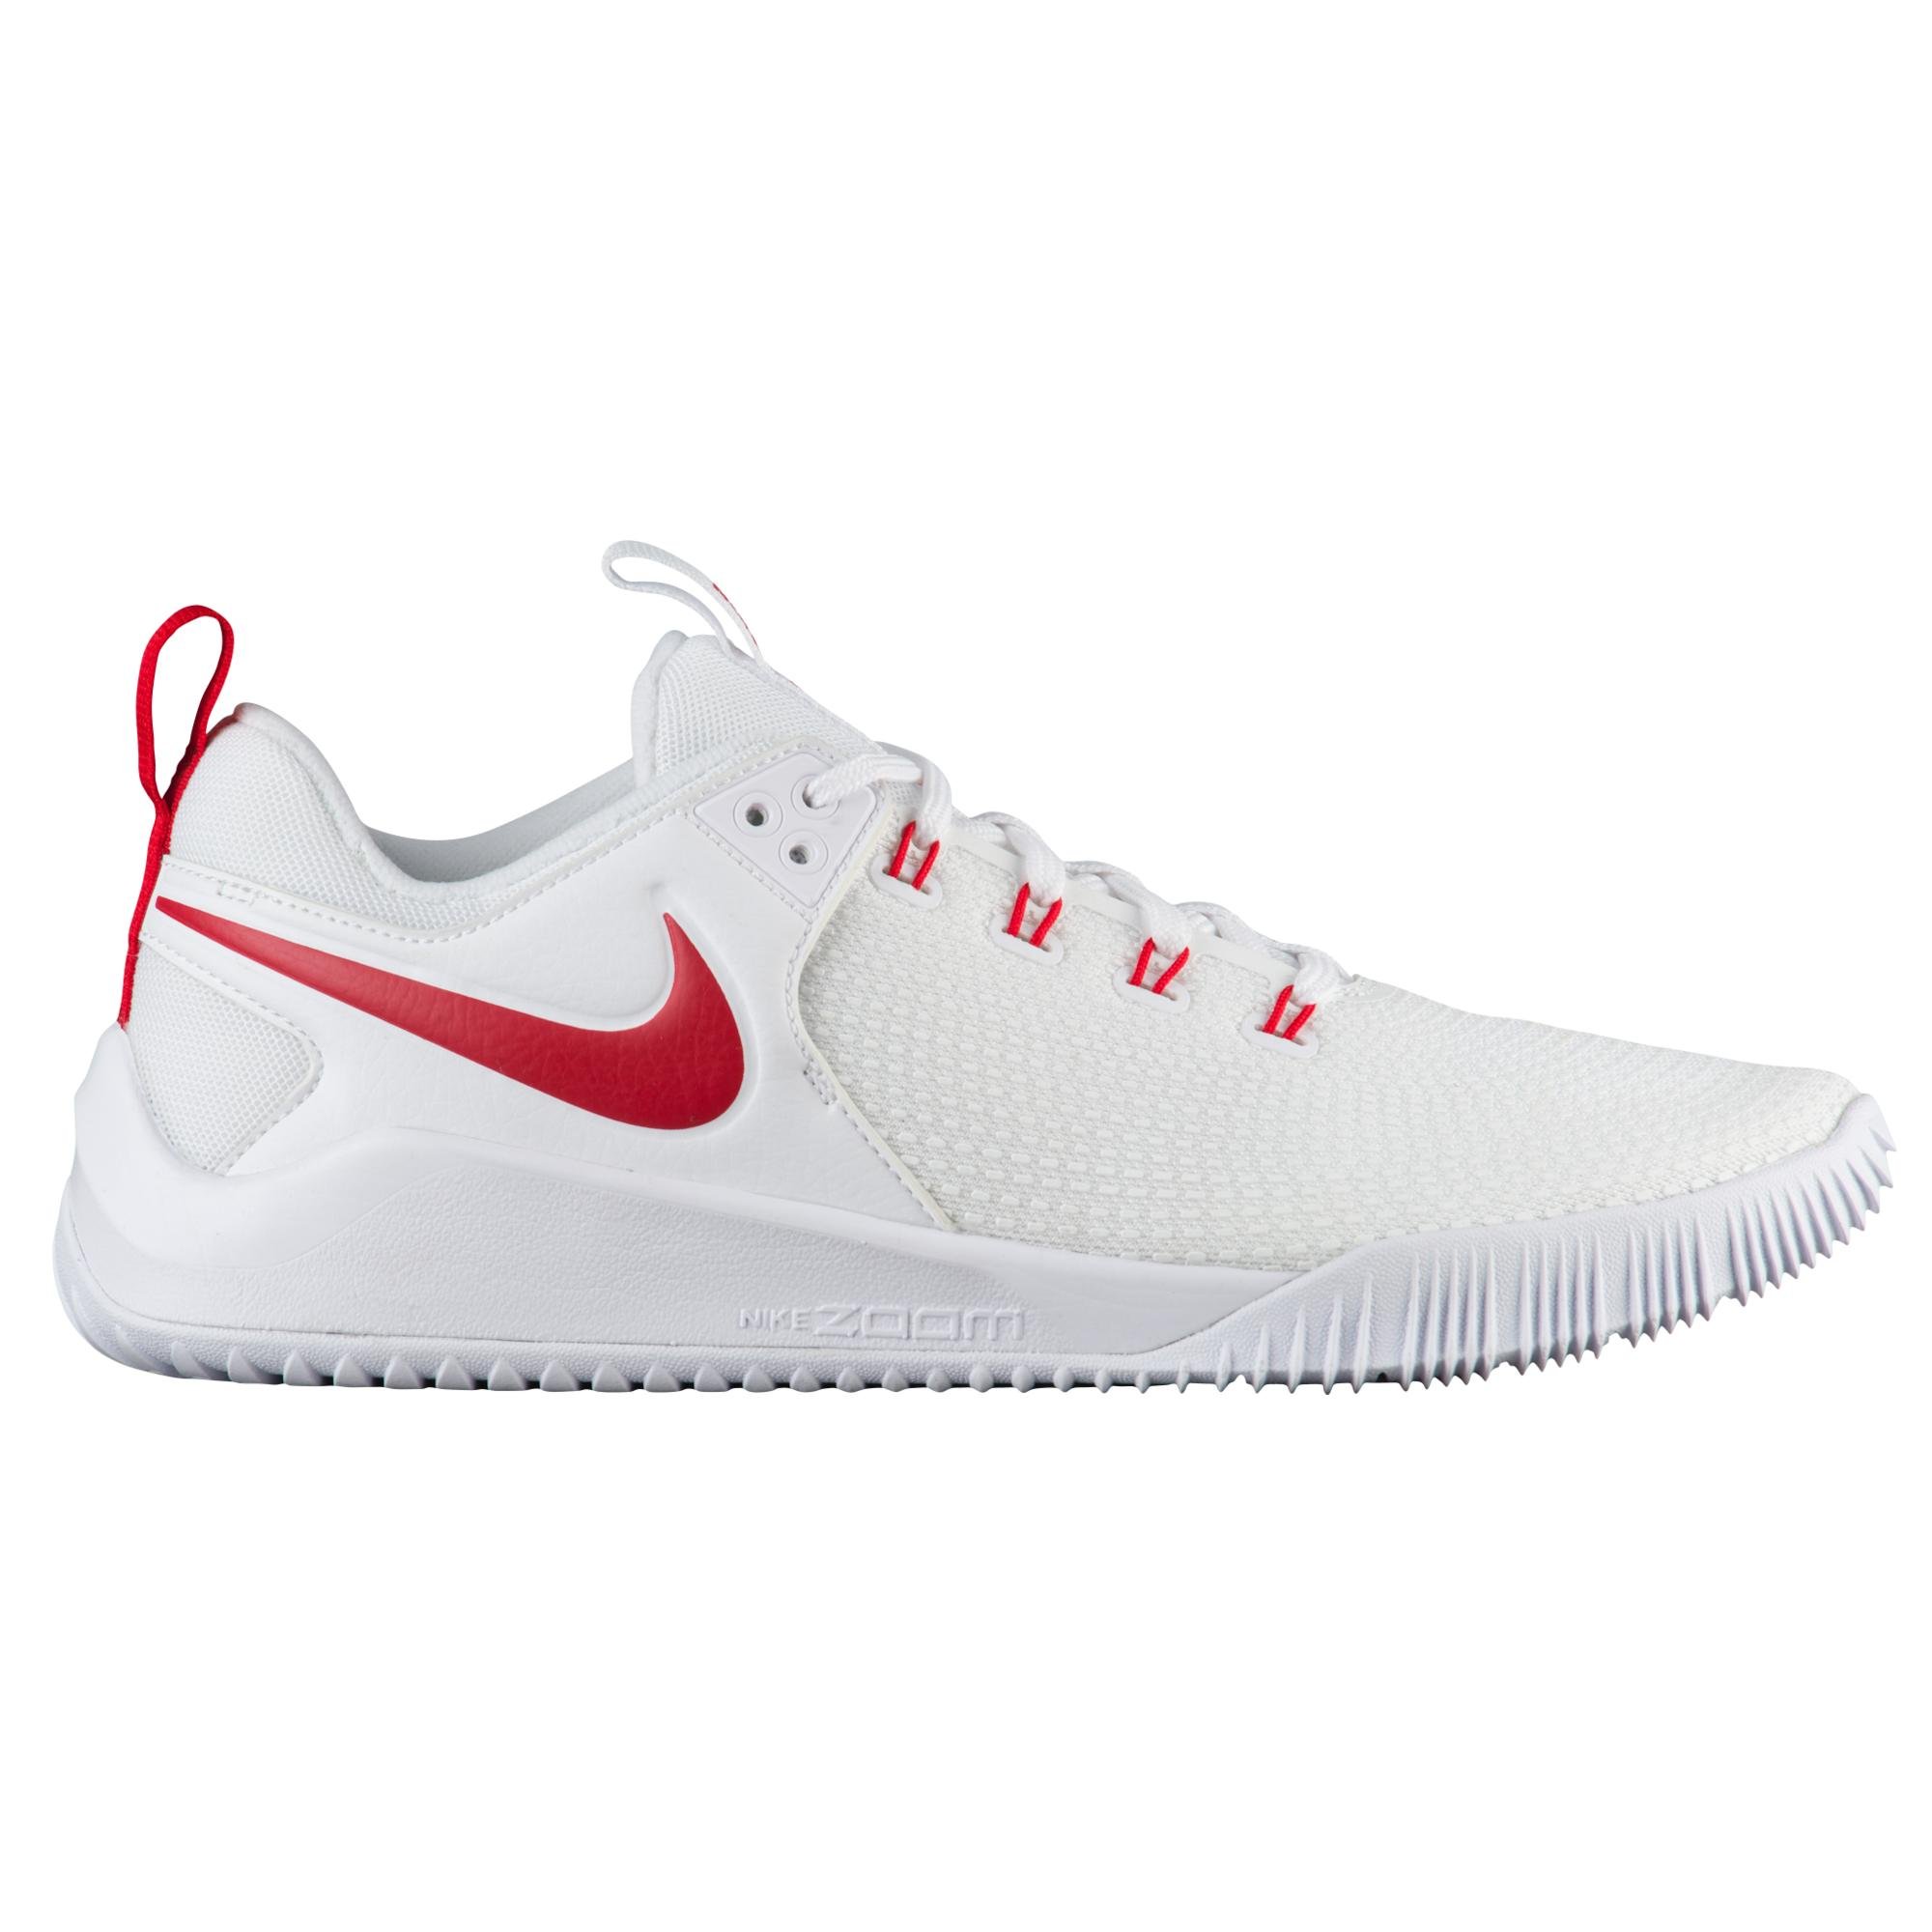 Nike Rubber Zoom Hyperace 2 Volleyball Shoes in White/University Red ...